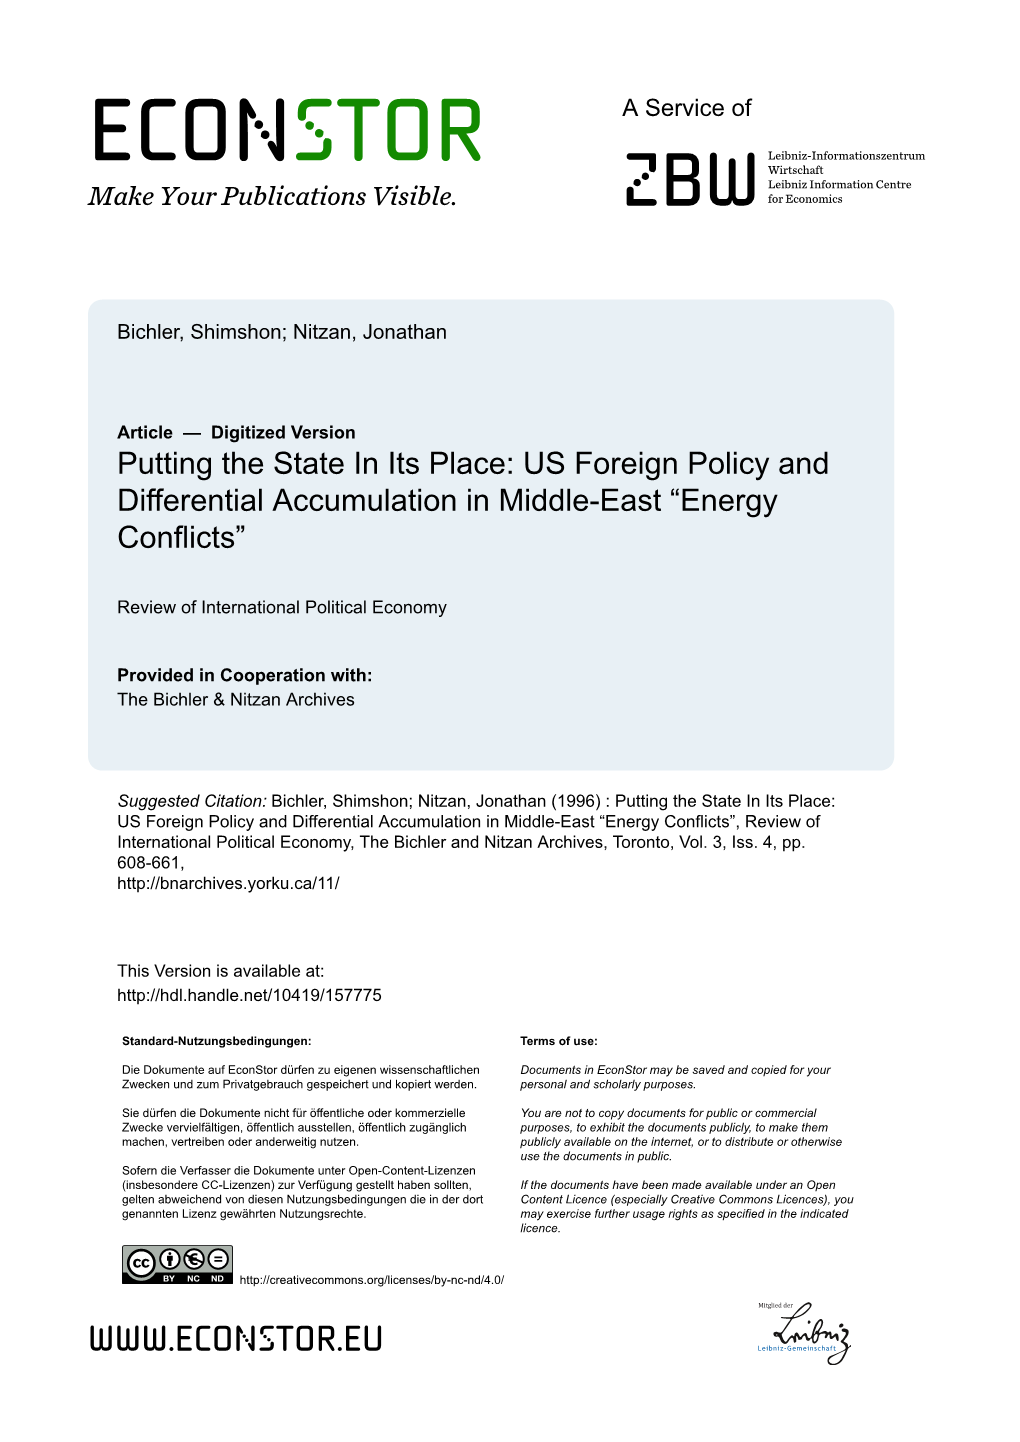 Putting the State in Its Place: US Foreign Policy and Differential Accumulation in Middle-East “Energy Conflicts”